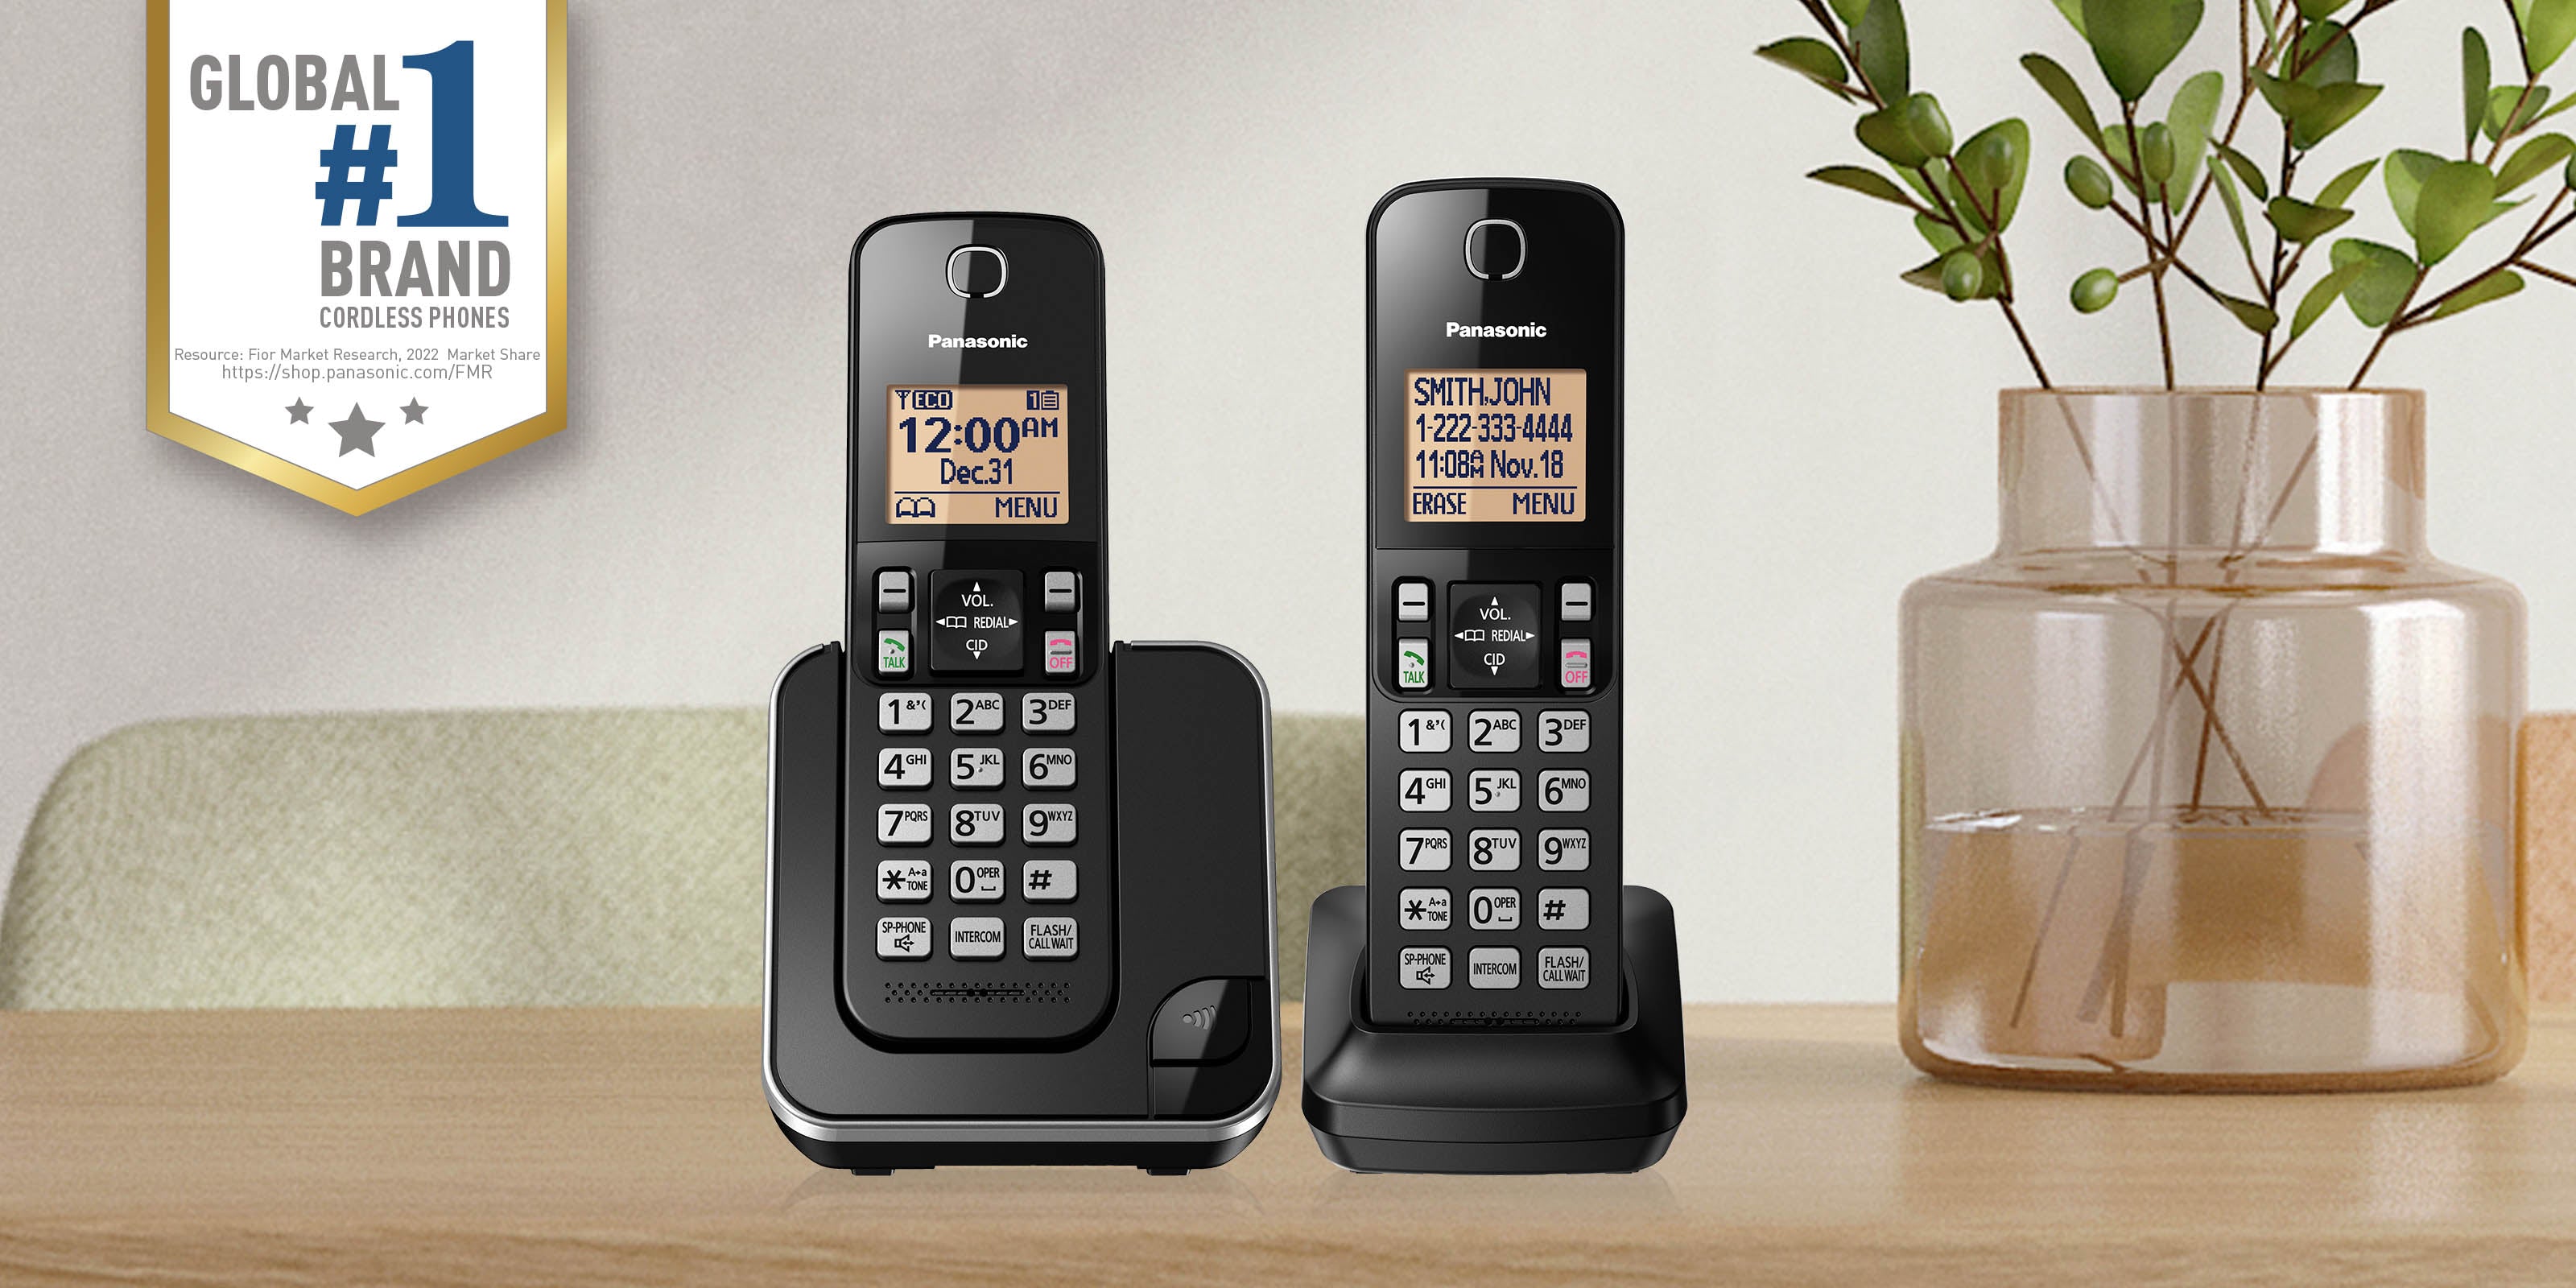 Panasonic Link2Cell Cordless Phone System with 5 Handsets, Digital 